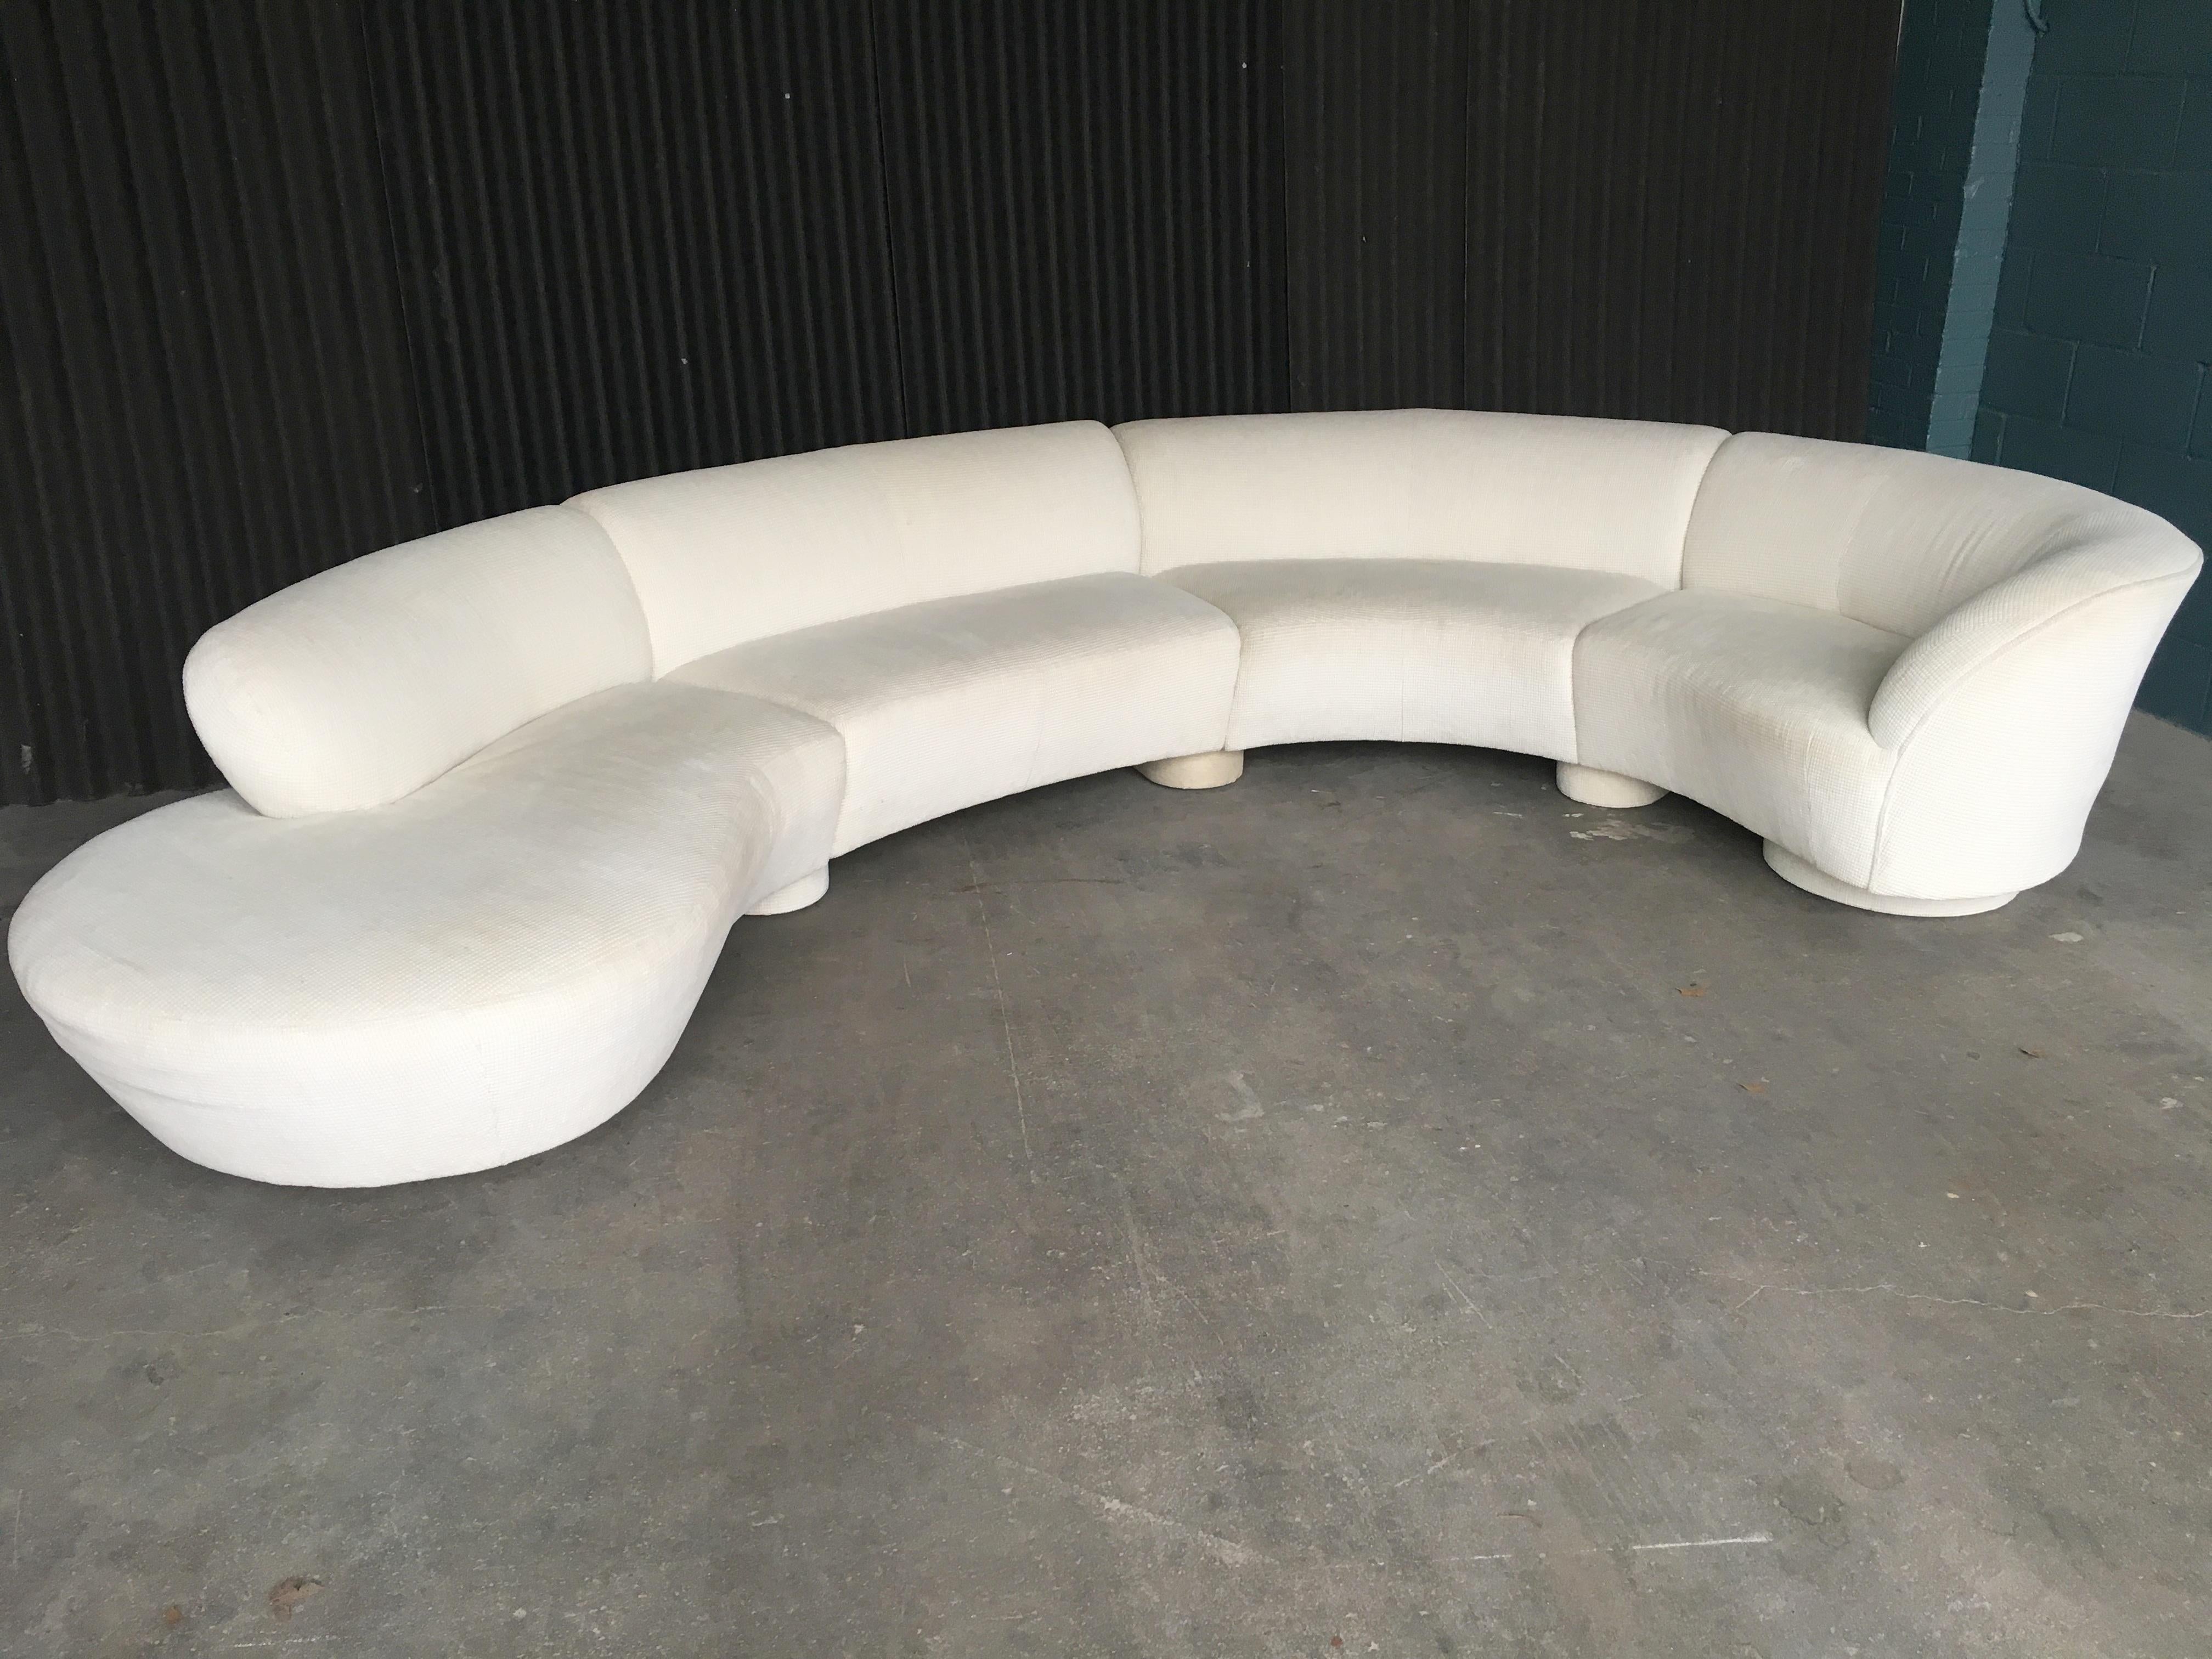 Exceptional serpentine sectional by Vladimir Kagan for Directional. All four pieces are tagged with the Directional Label.
Nubby fabric is in very good to excellent condition with no rips, stains or tears anywhere.
Just had the entire sectional